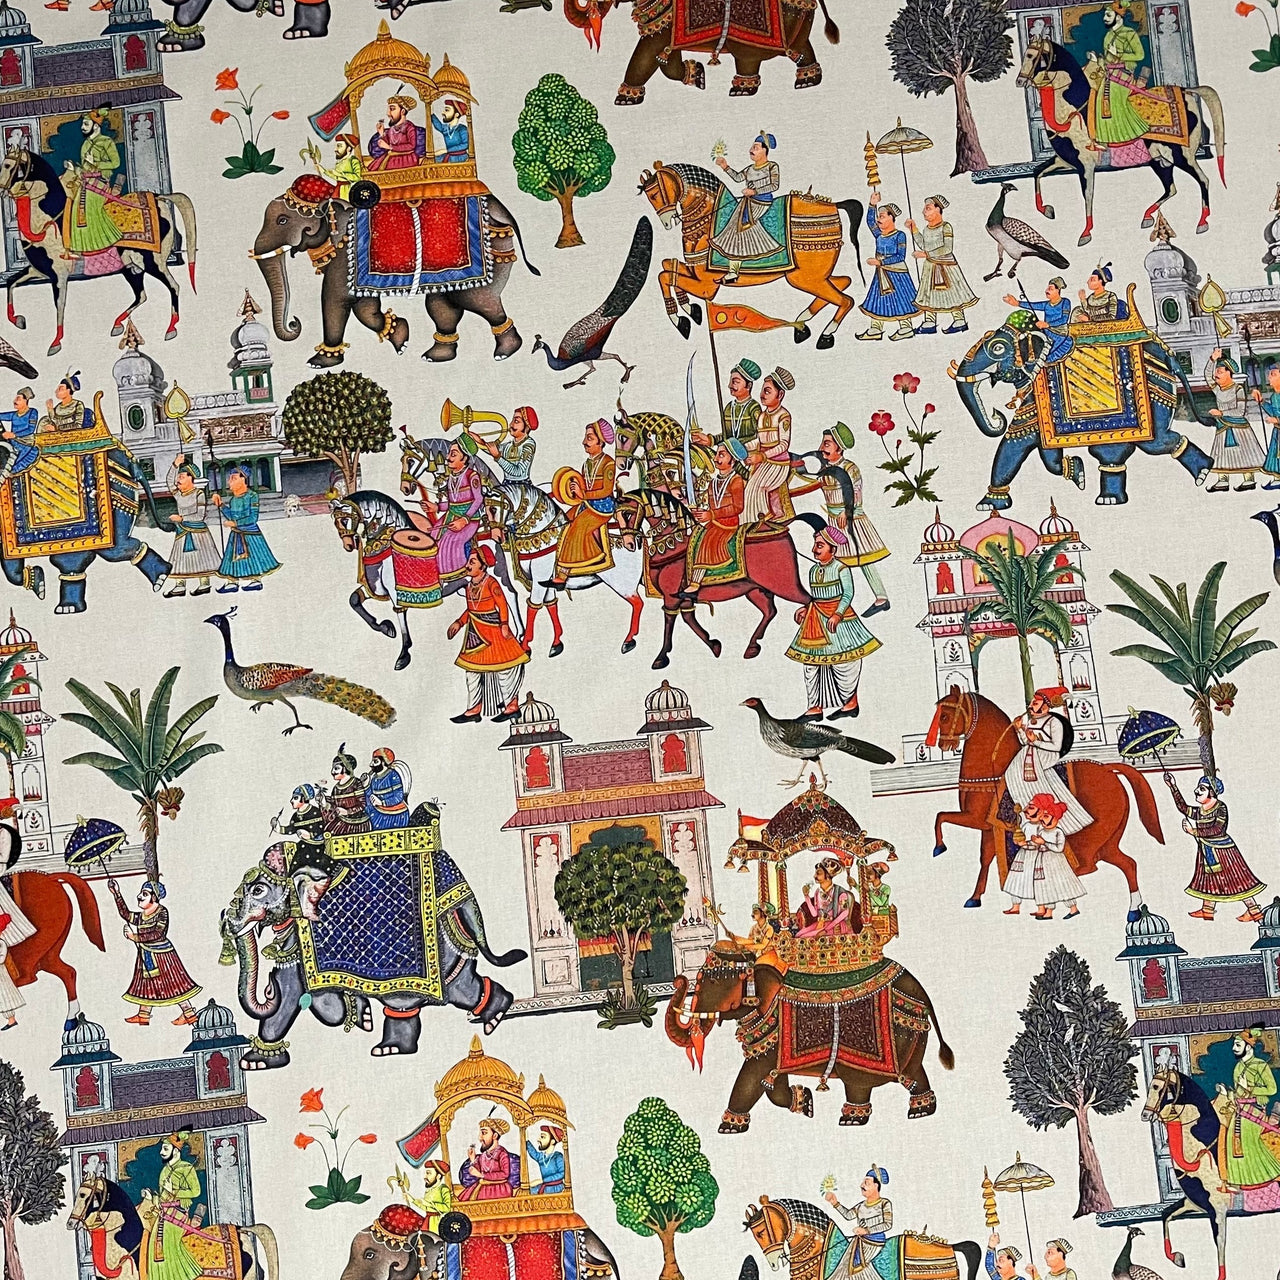 White Cotton Fabric with Elephants & Palms / Pattern Palatial Jaipur Dreams